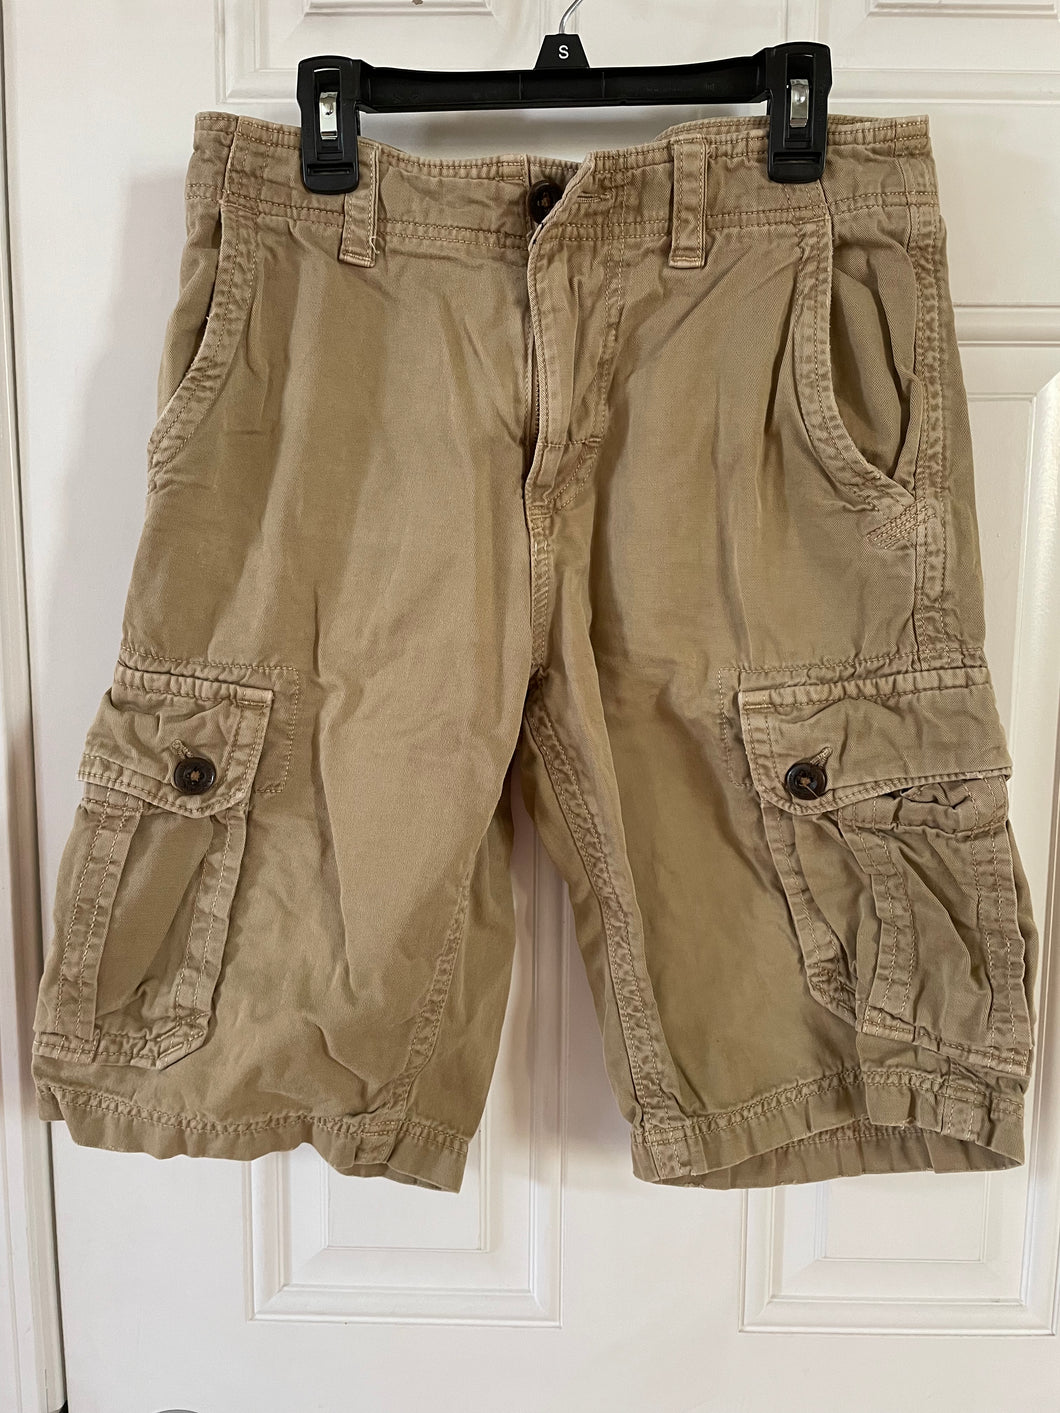 American Eagle - Great condition!  Cargo Shorts - Size 28 Small